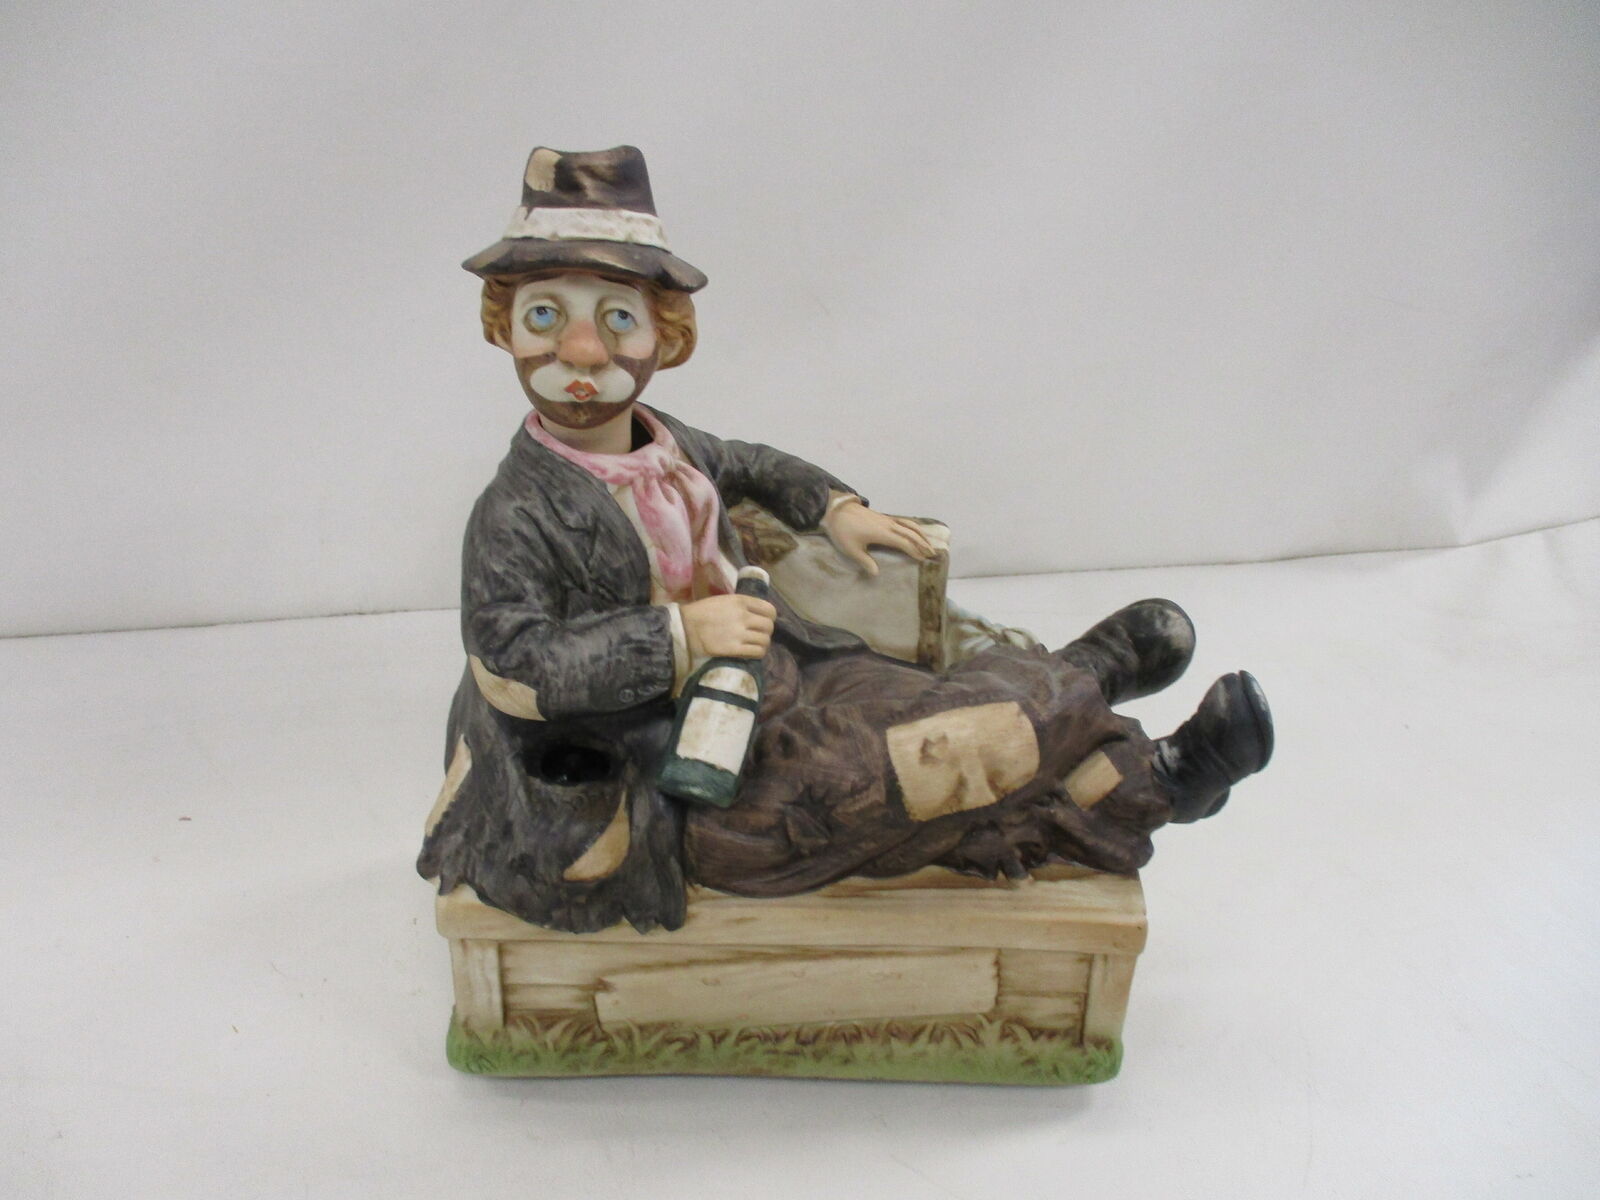 MELODY IN MOTION VINTAGE PORCELAIN WHISTLING CLOWN